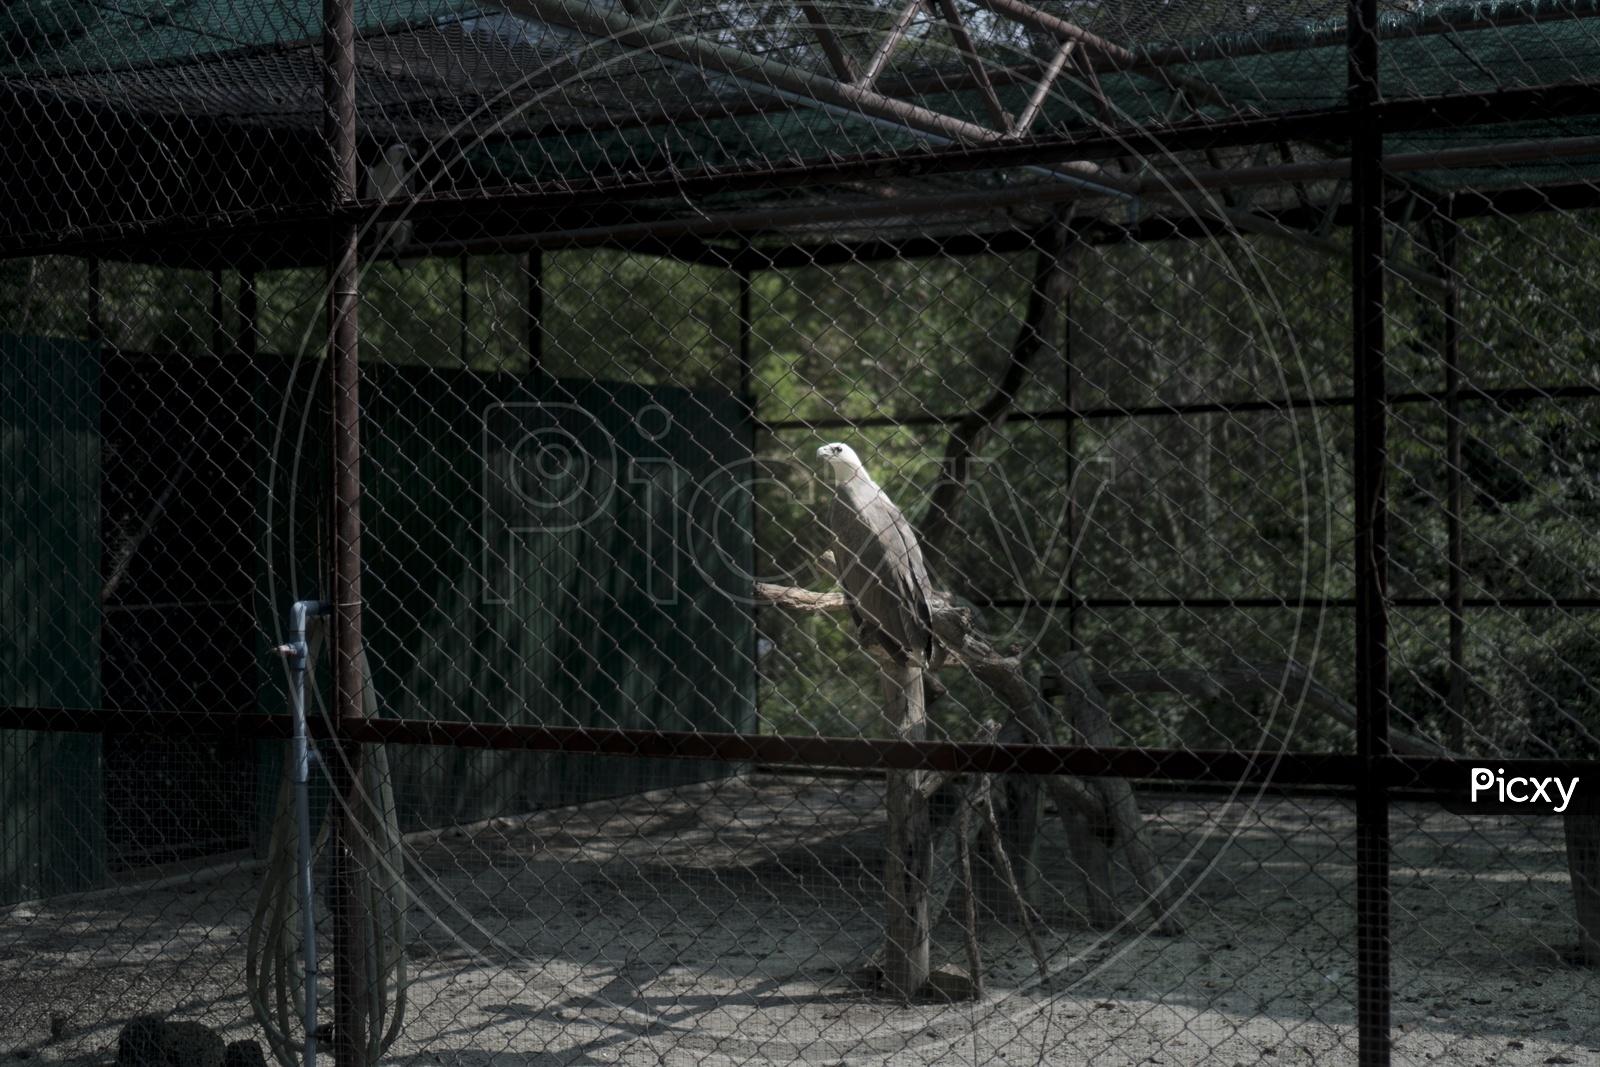 A bird in cage in Hong Kong Zoo